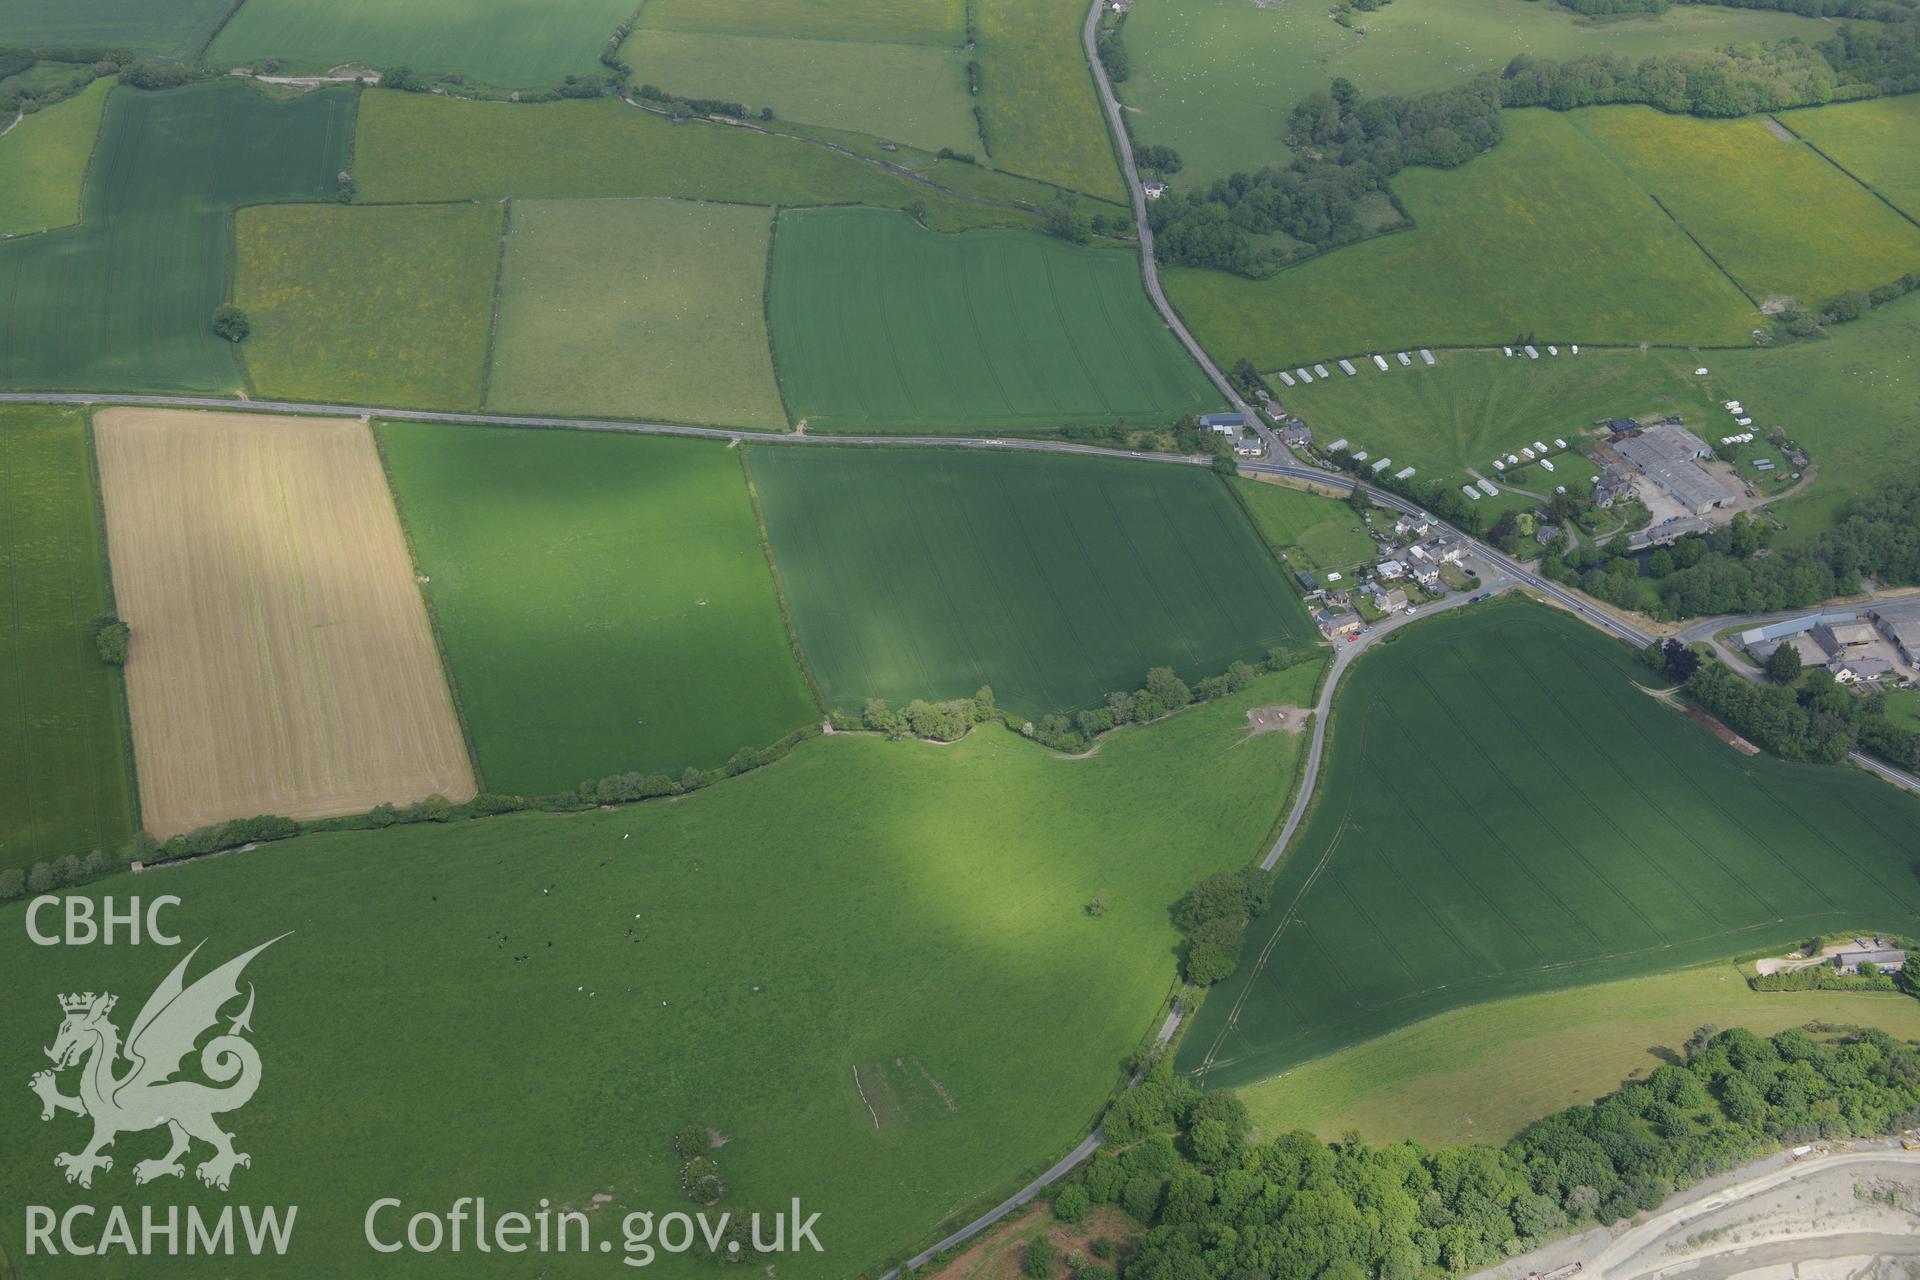 Walton Court Farmstead; Walton Road Camp I and II; cropmark ringditch south west of Walton; cropmark west of Walton; Court Farm barrow; cropmark enclosure and cropmark ringdith north of Ridding Brook. Oblique aerial photograph taken during the Royal Commission's programme of archaeological aerial reconnaissance by Toby Driver on 11th June 2015.